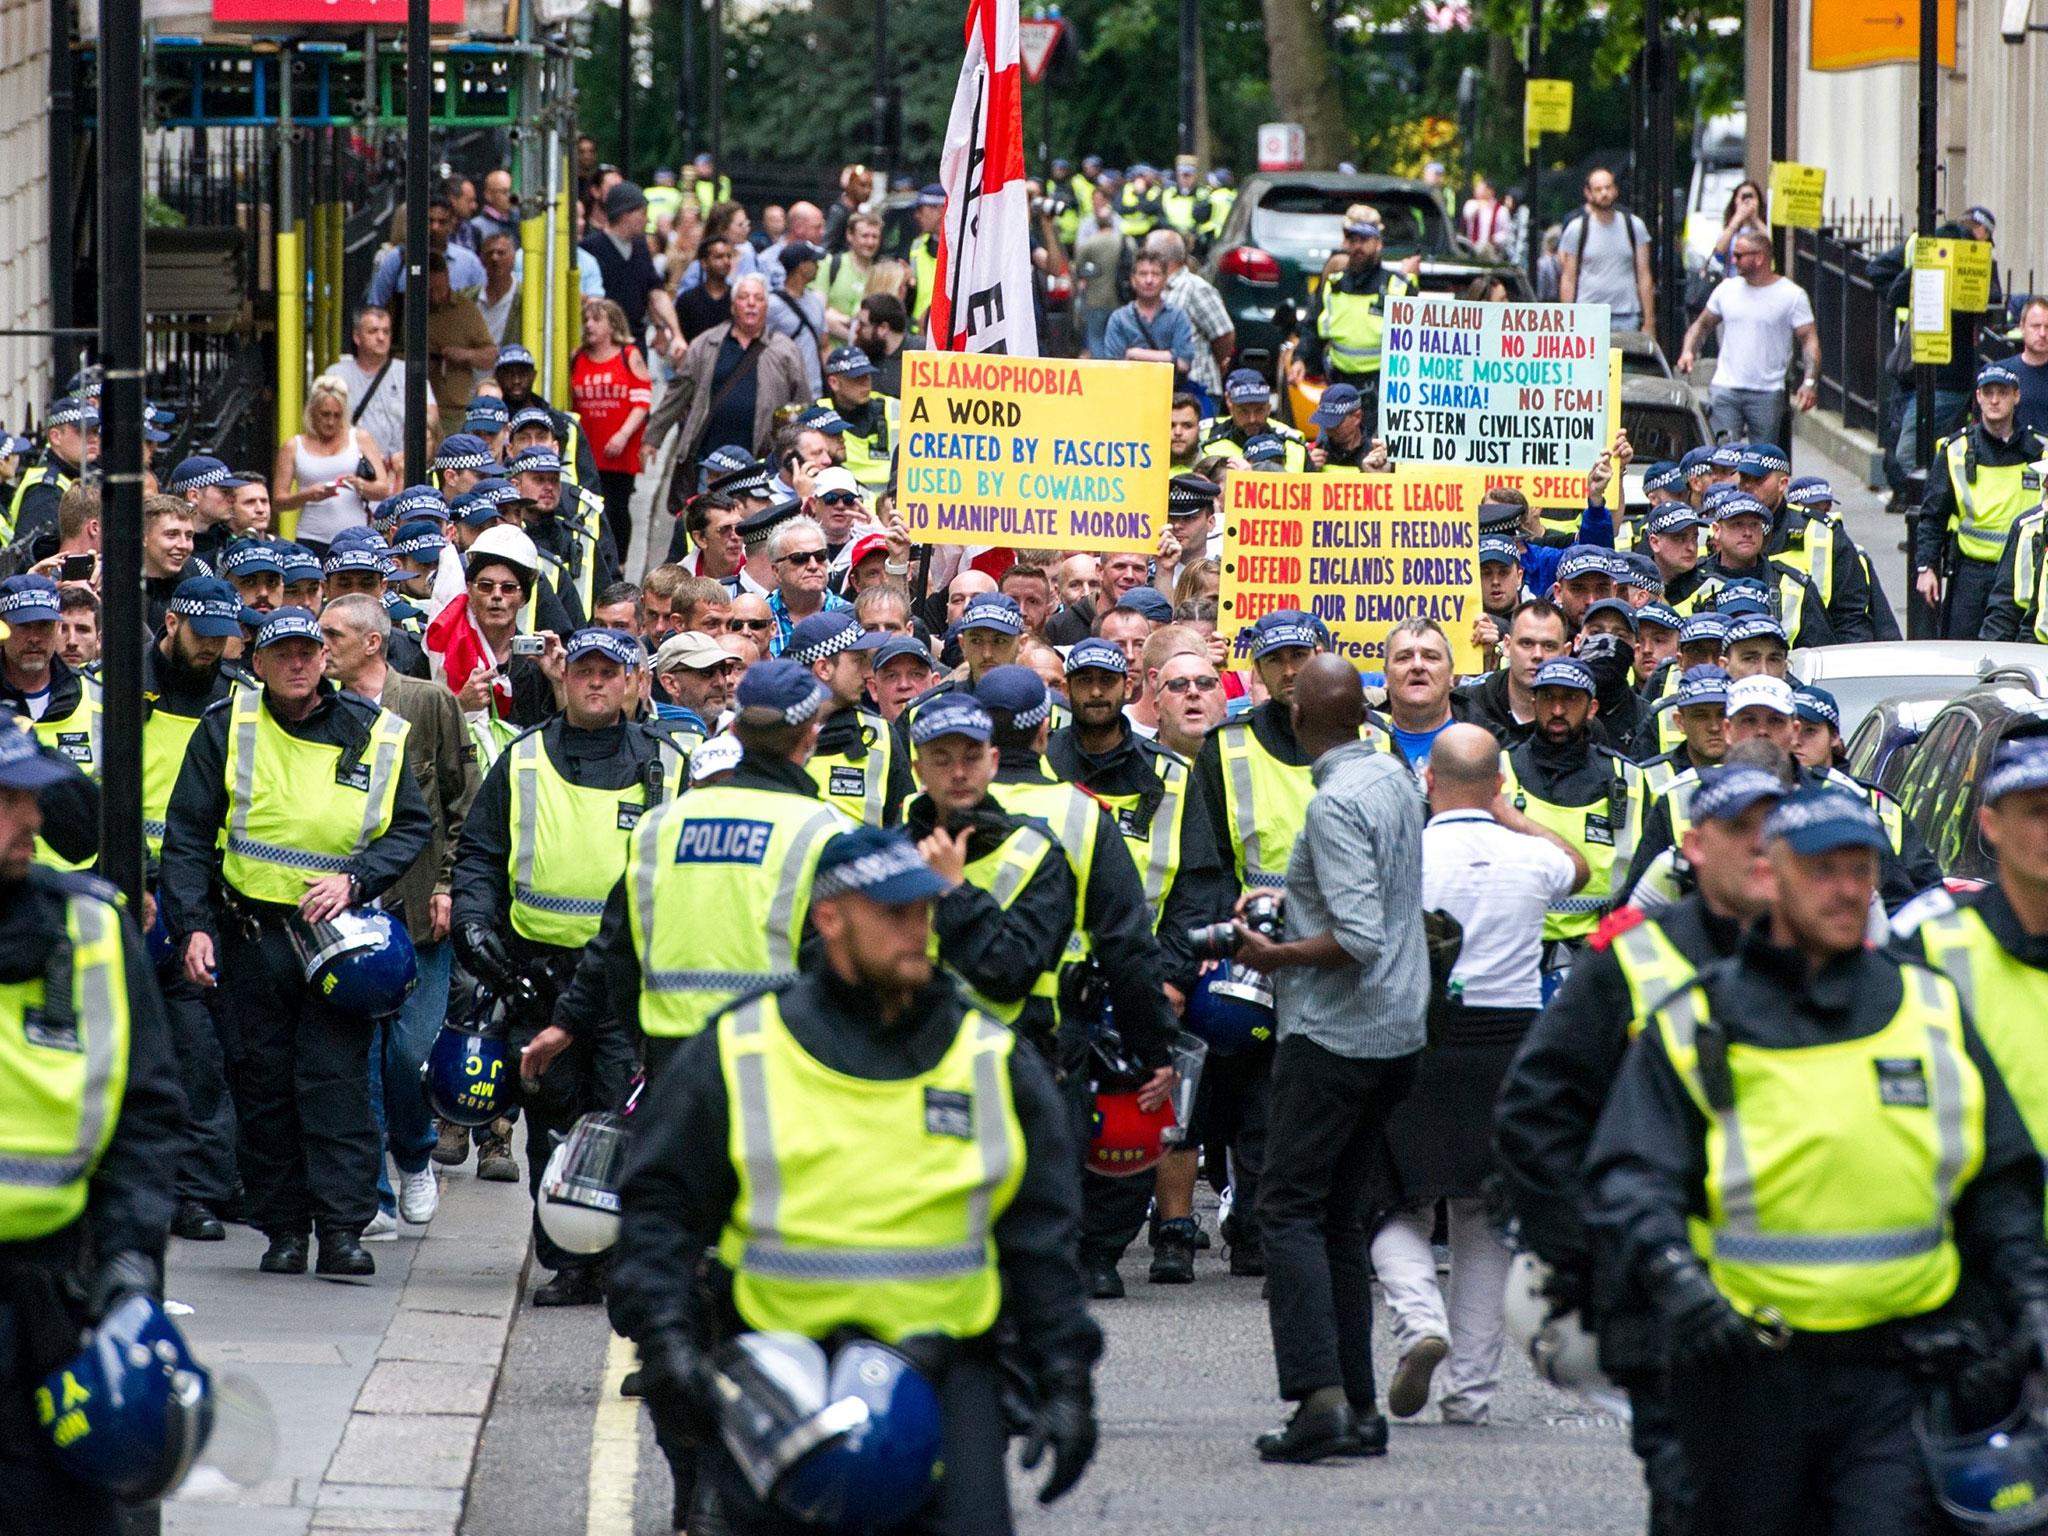 Members of the far-right anti-immigration English Defence League (EDL) march from Victoria Embankment to Charing Cross Station under heavy police guard, in Londnon